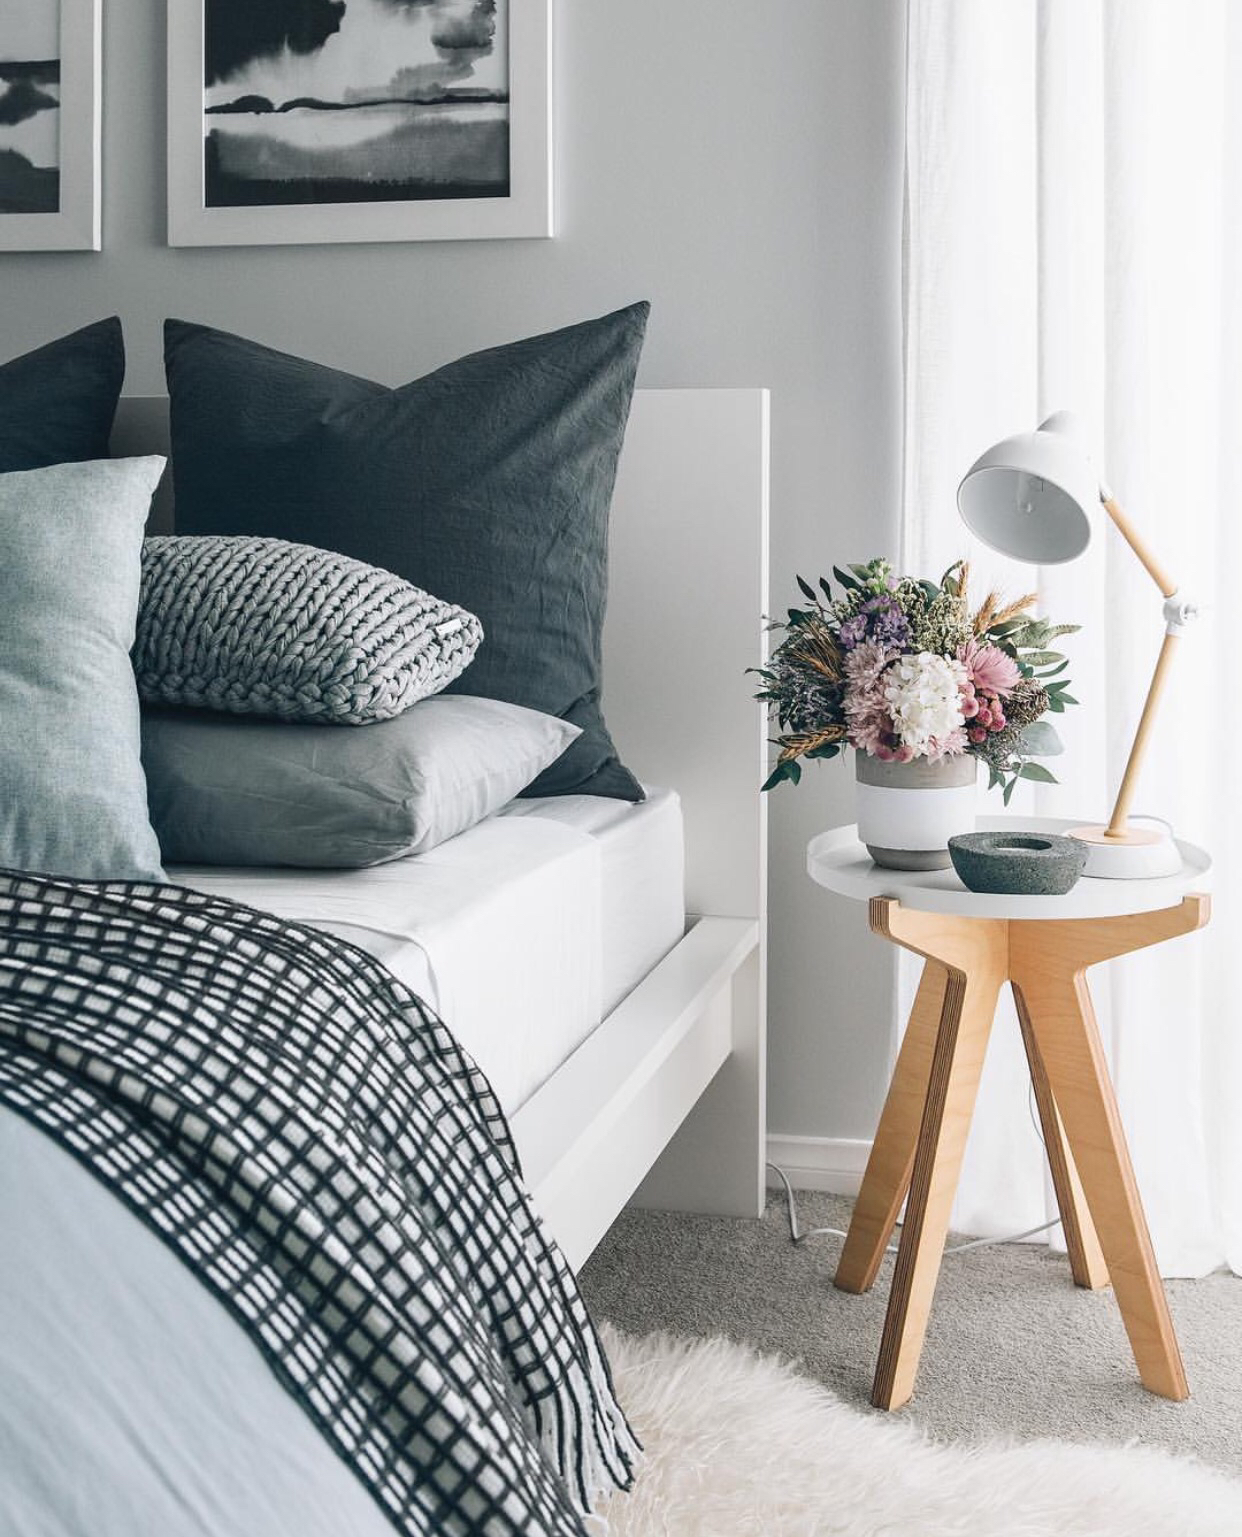 What's Hot on Pinterest- Lighting and Scandinavian Style Ideas